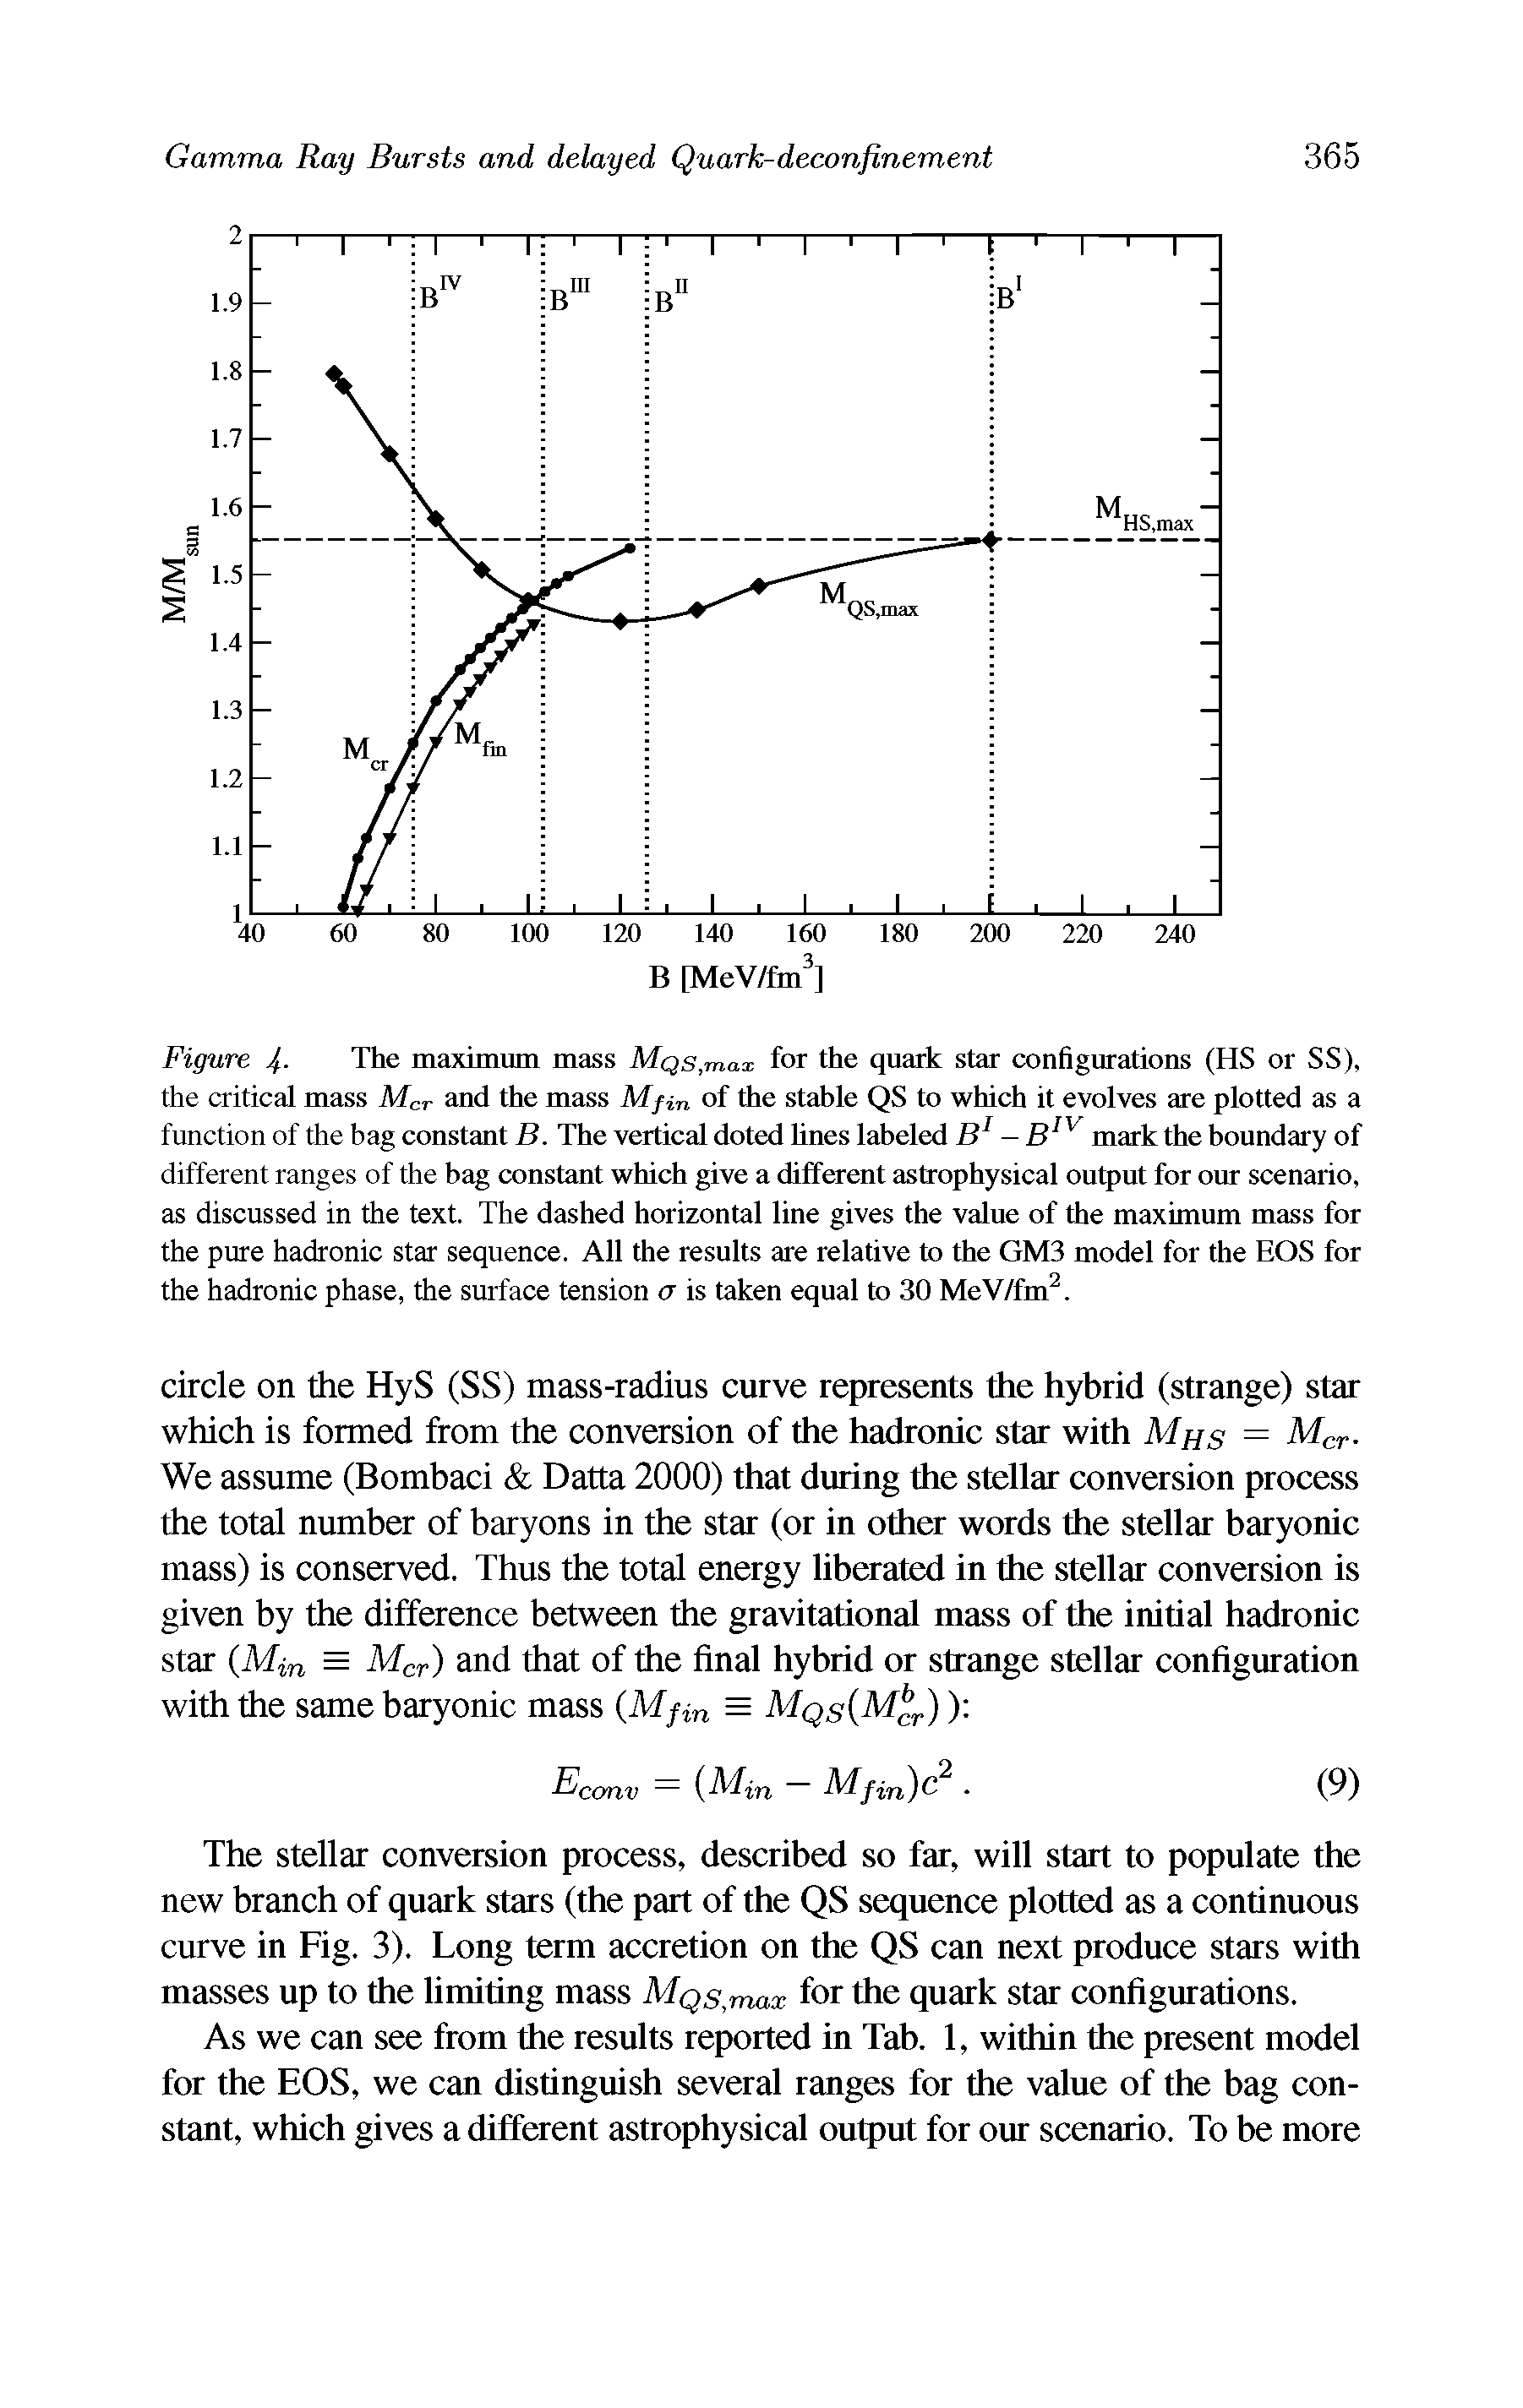 Figure Jt. The maximum mass MQs,max for the quark star configurations (HS or SS), the critical mass Mcr and the mass Mfi of the stable QS to which it evolves are plotted as a function of the bag constant B. The vertical doted fines labeled B1 — BIV mark the boundary of different ranges of the bag constant which give a different astrophysical output for our scenario, as discussed in the text. The dashed horizontal line gives the value of the maximum mass for the pure hadronic star sequence. All the results are relative to the GM3 model for the EOS for the hadronic phase, the surface tension a is taken equal to 30 MeV/fm2.